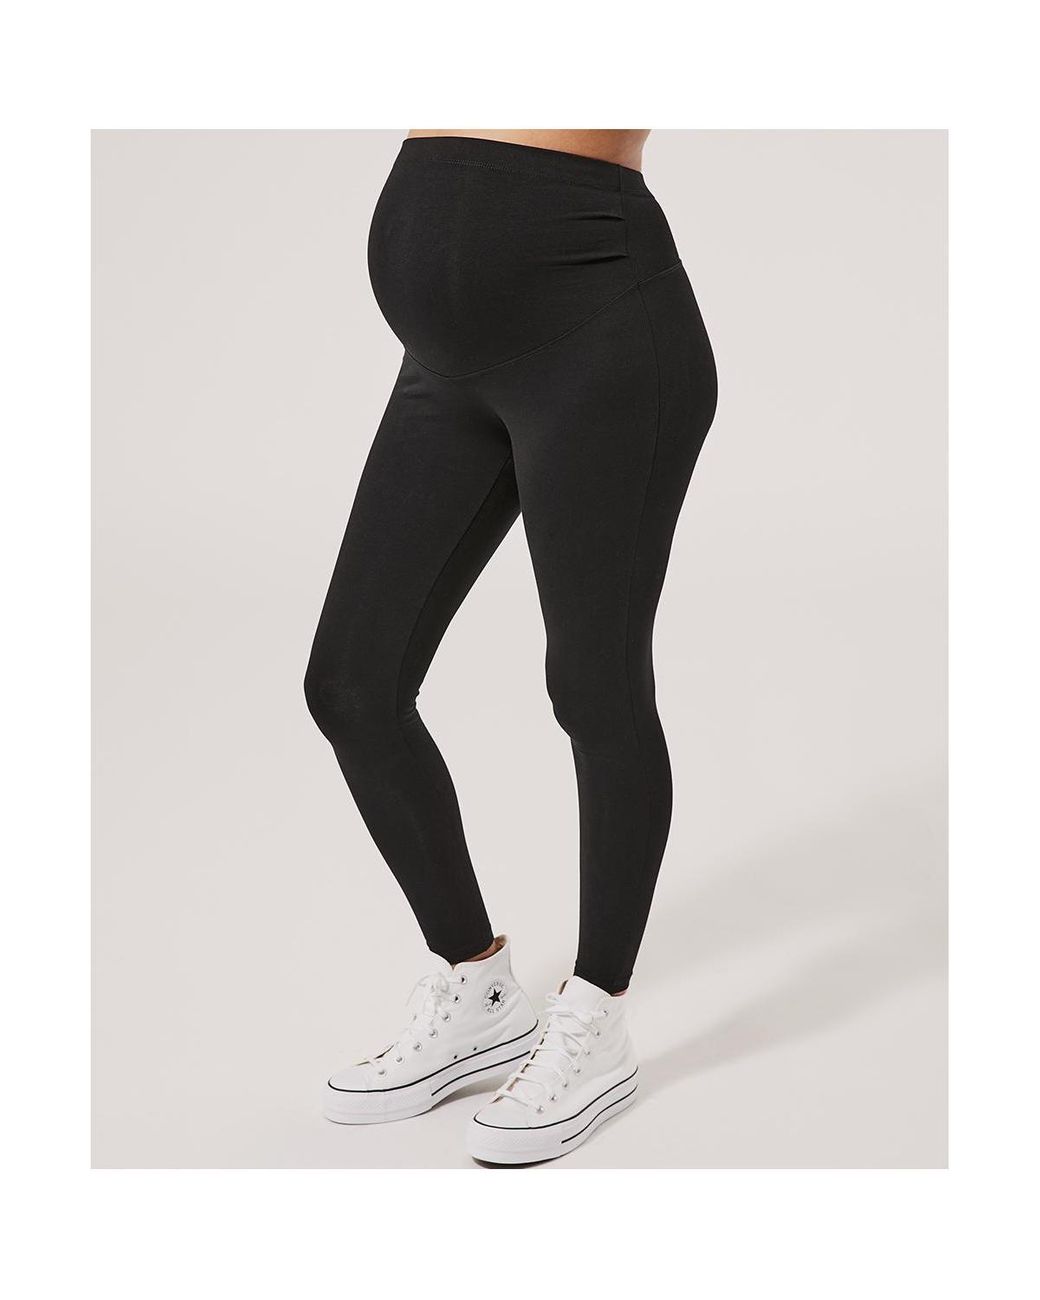 Pact Maternity Go-to legging Made With Organic Cotton in Black